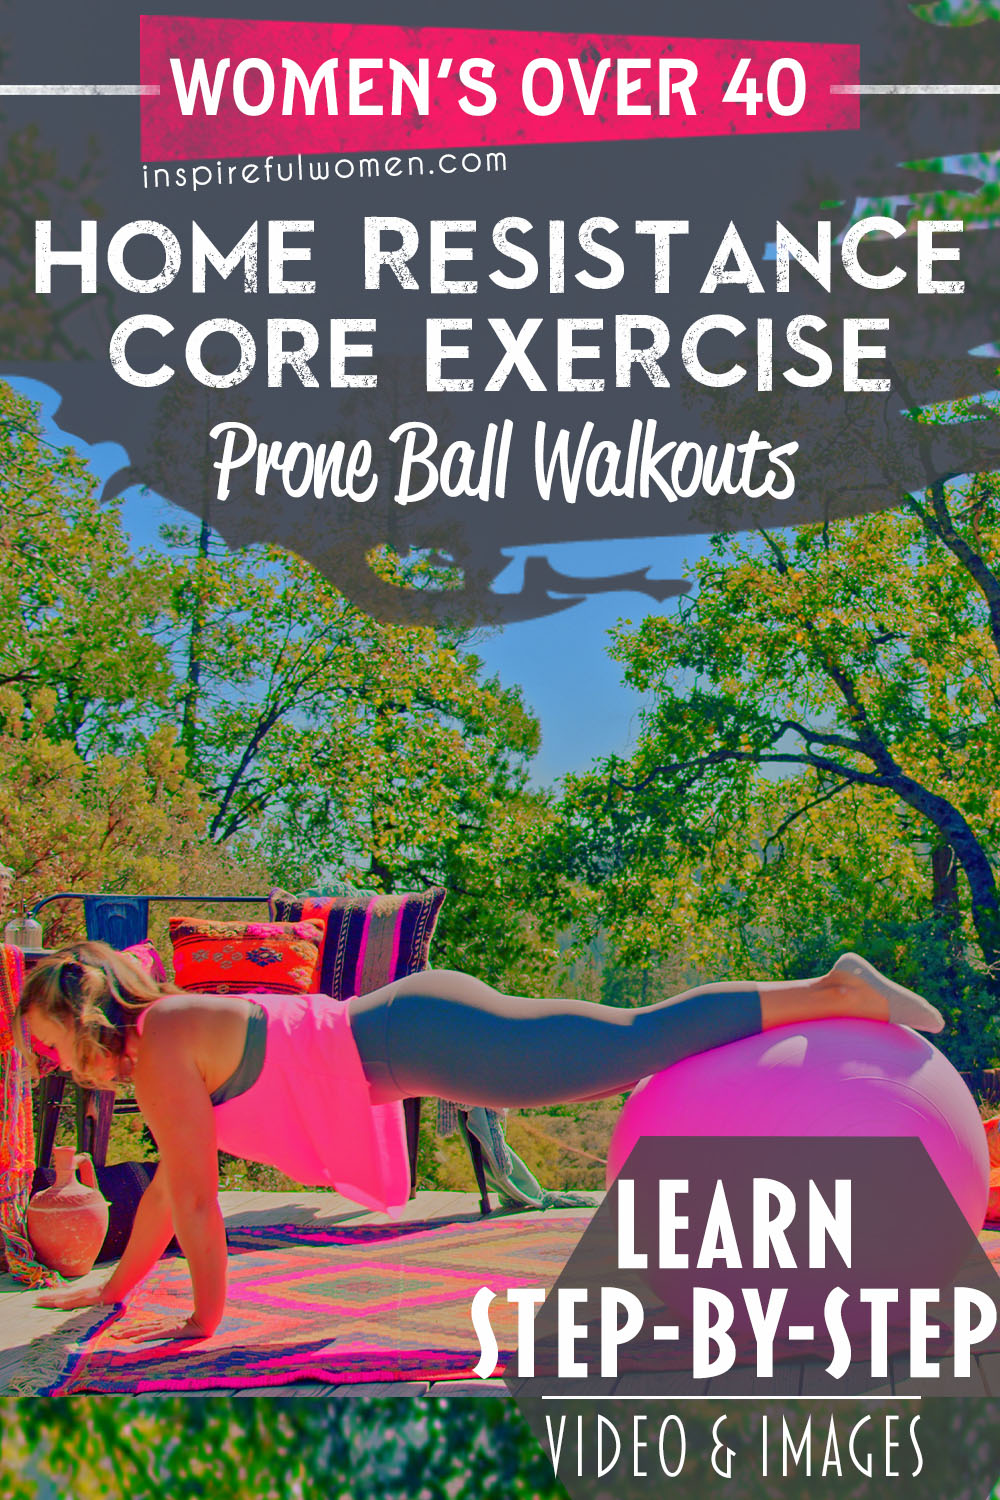 swiss-ball-walkouts-prone-home-stomach-ab-core-toning-exercise-women-over-40